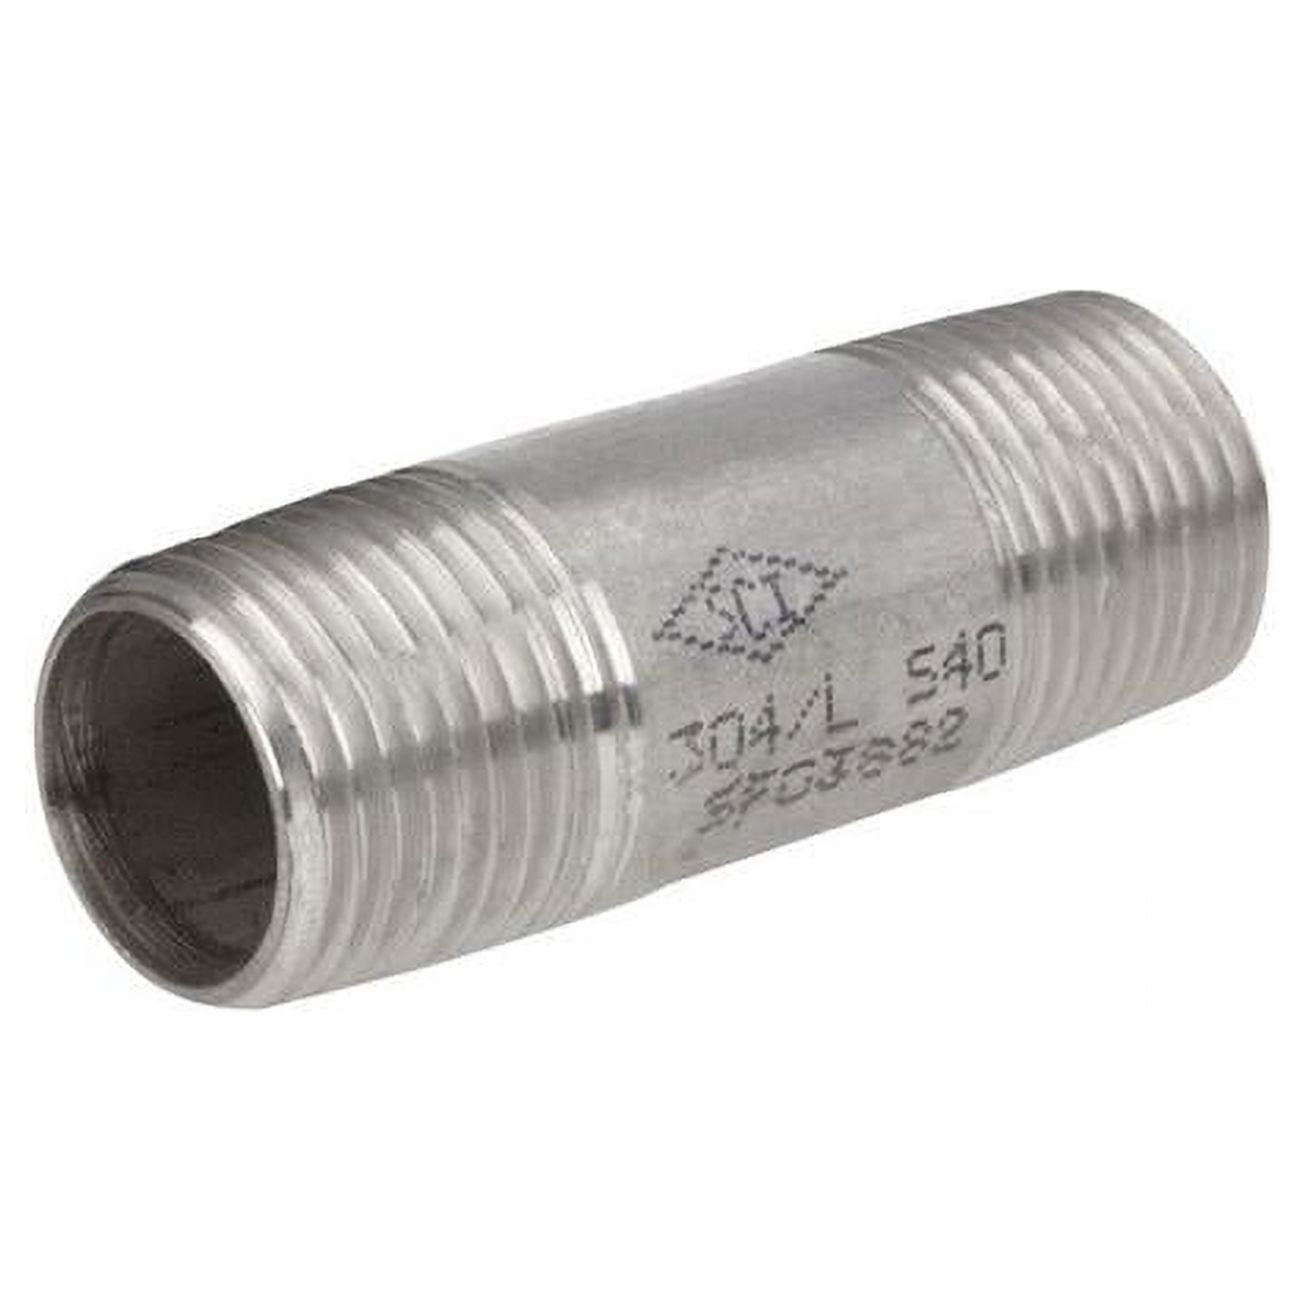 4809984 Stainless Steel Pipe Nipple - 1 In. X 1 Dia. X 2 In.